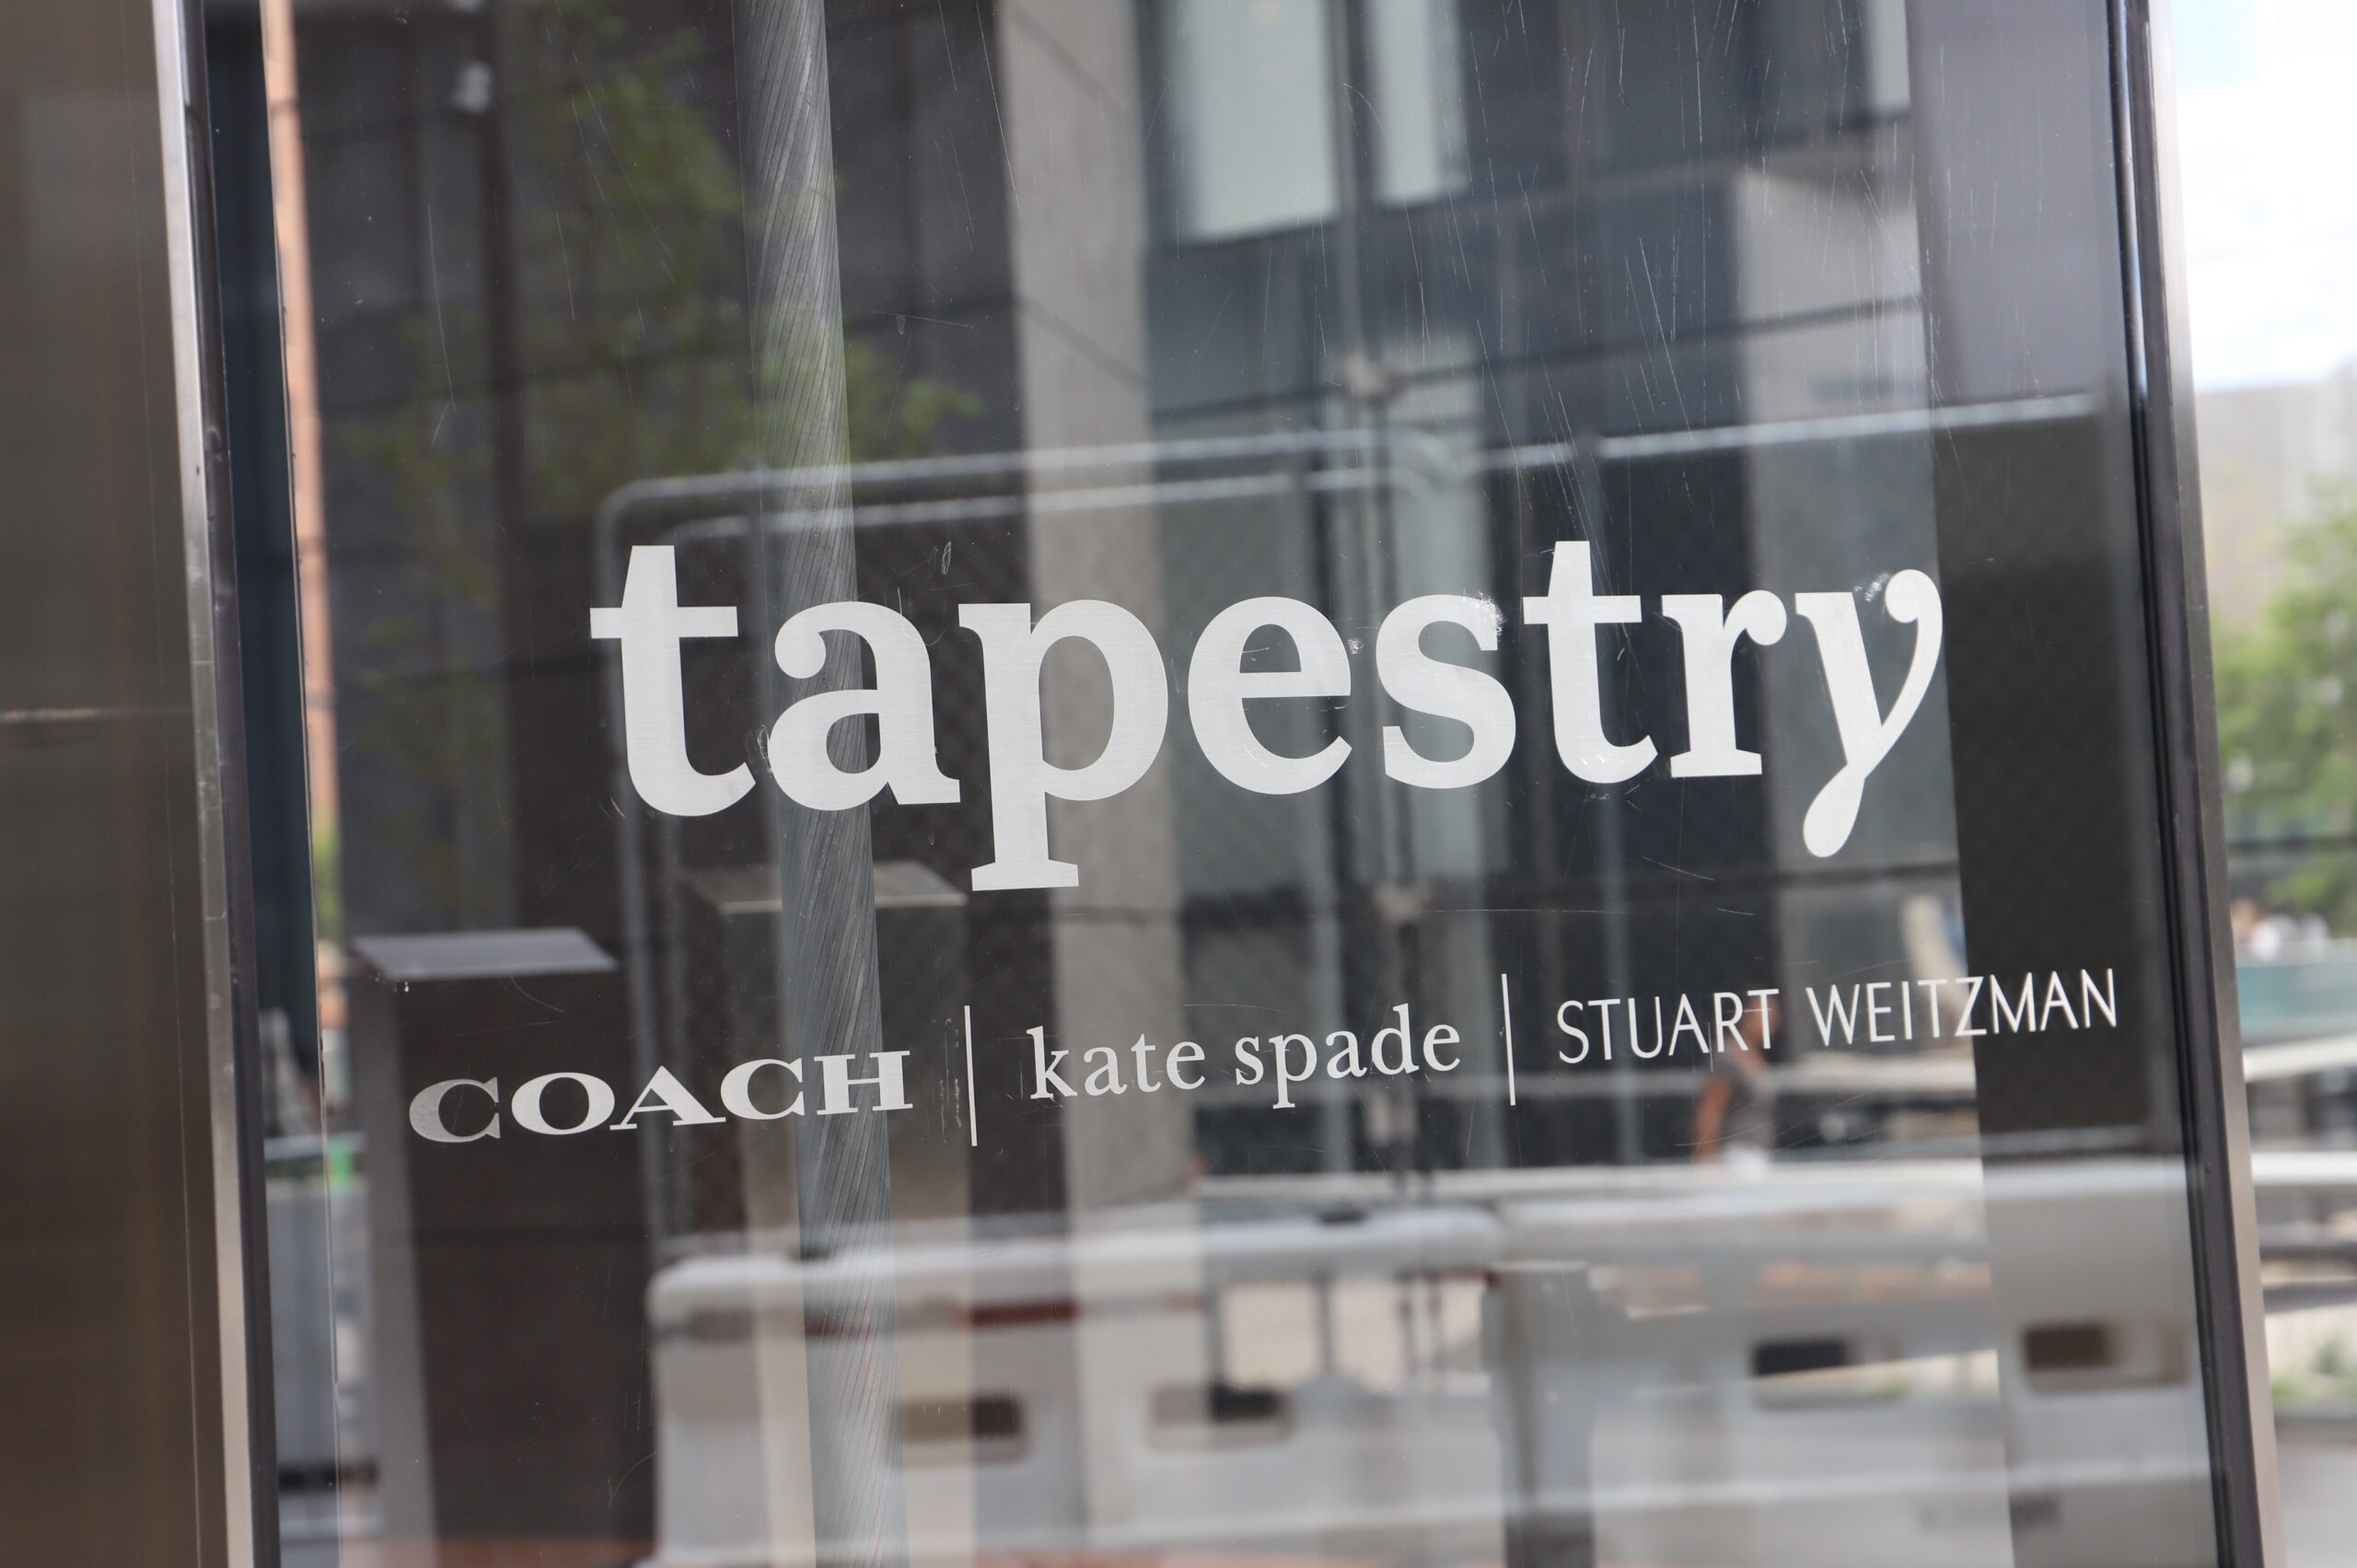 Working at Tapestry Inc., Coach, kate spade new york, Stuart Weitzman